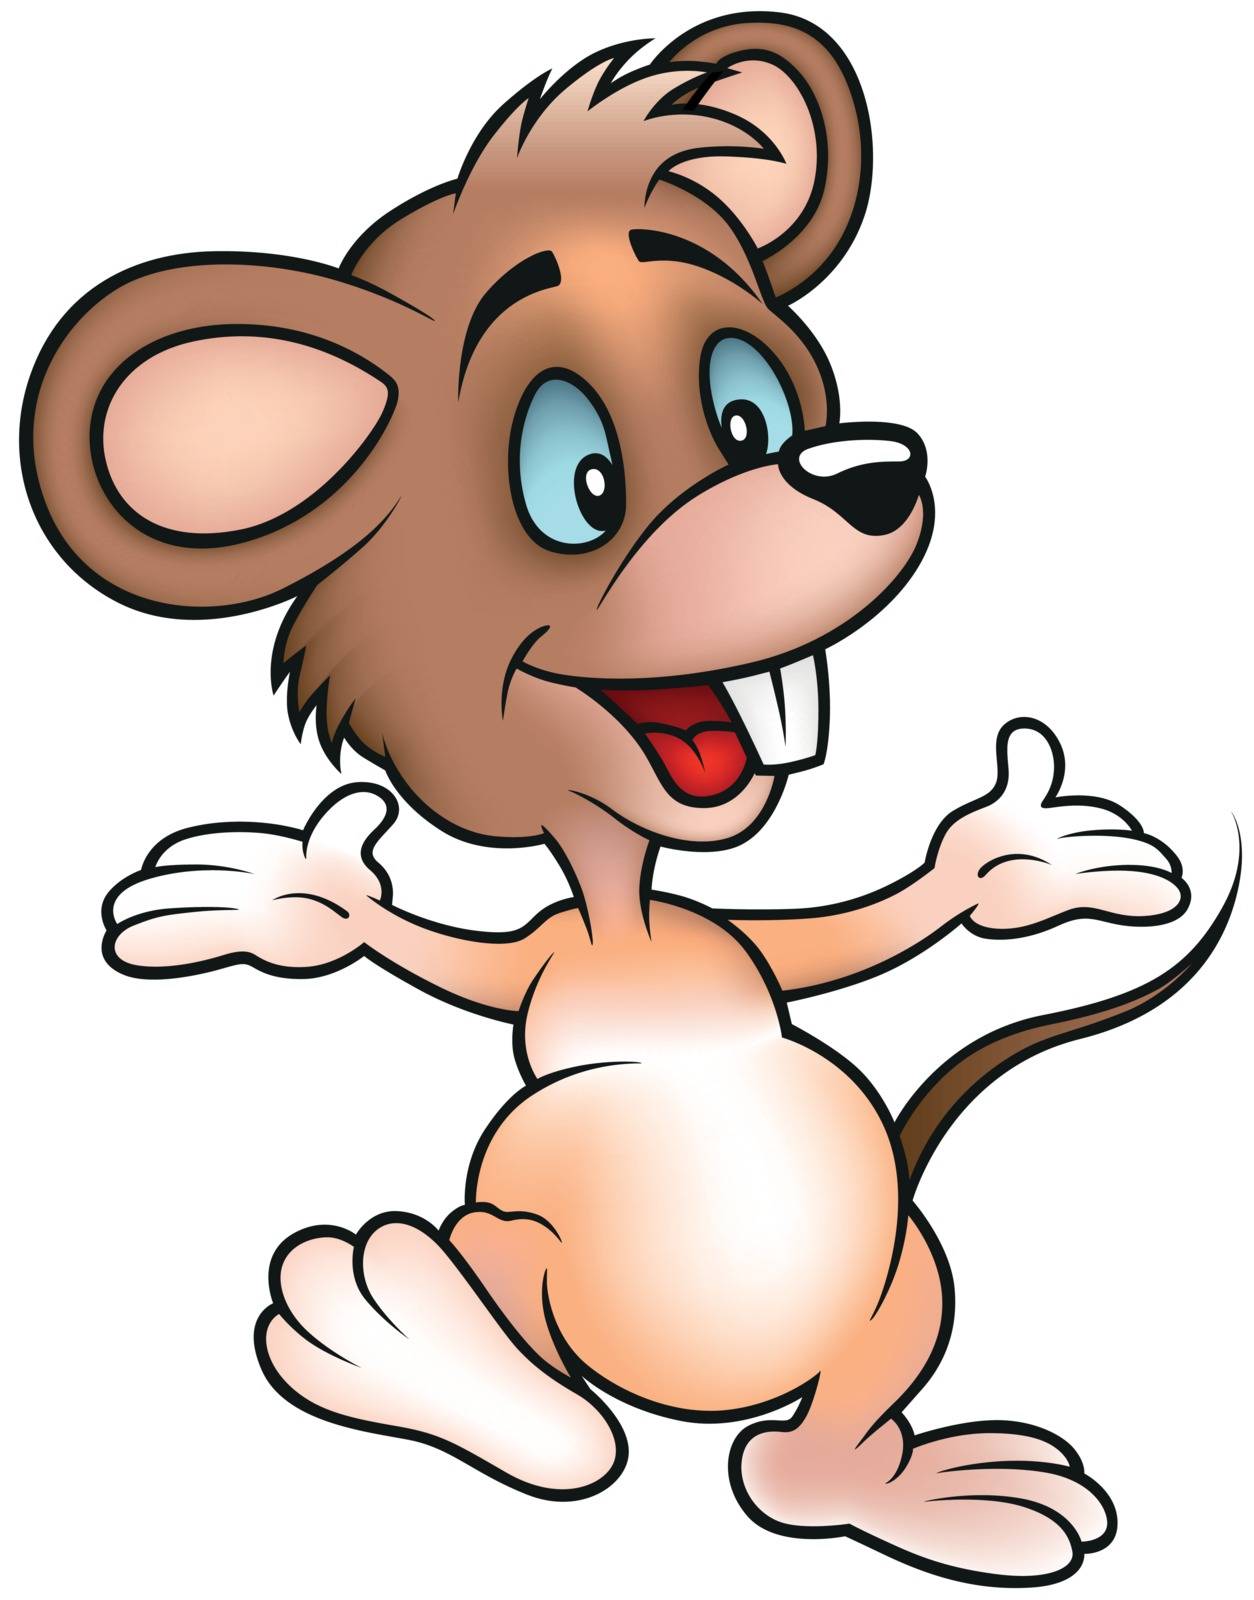 Happy Smiling Brown Mouse Walking - Cute Cartoon Illustration, Vector